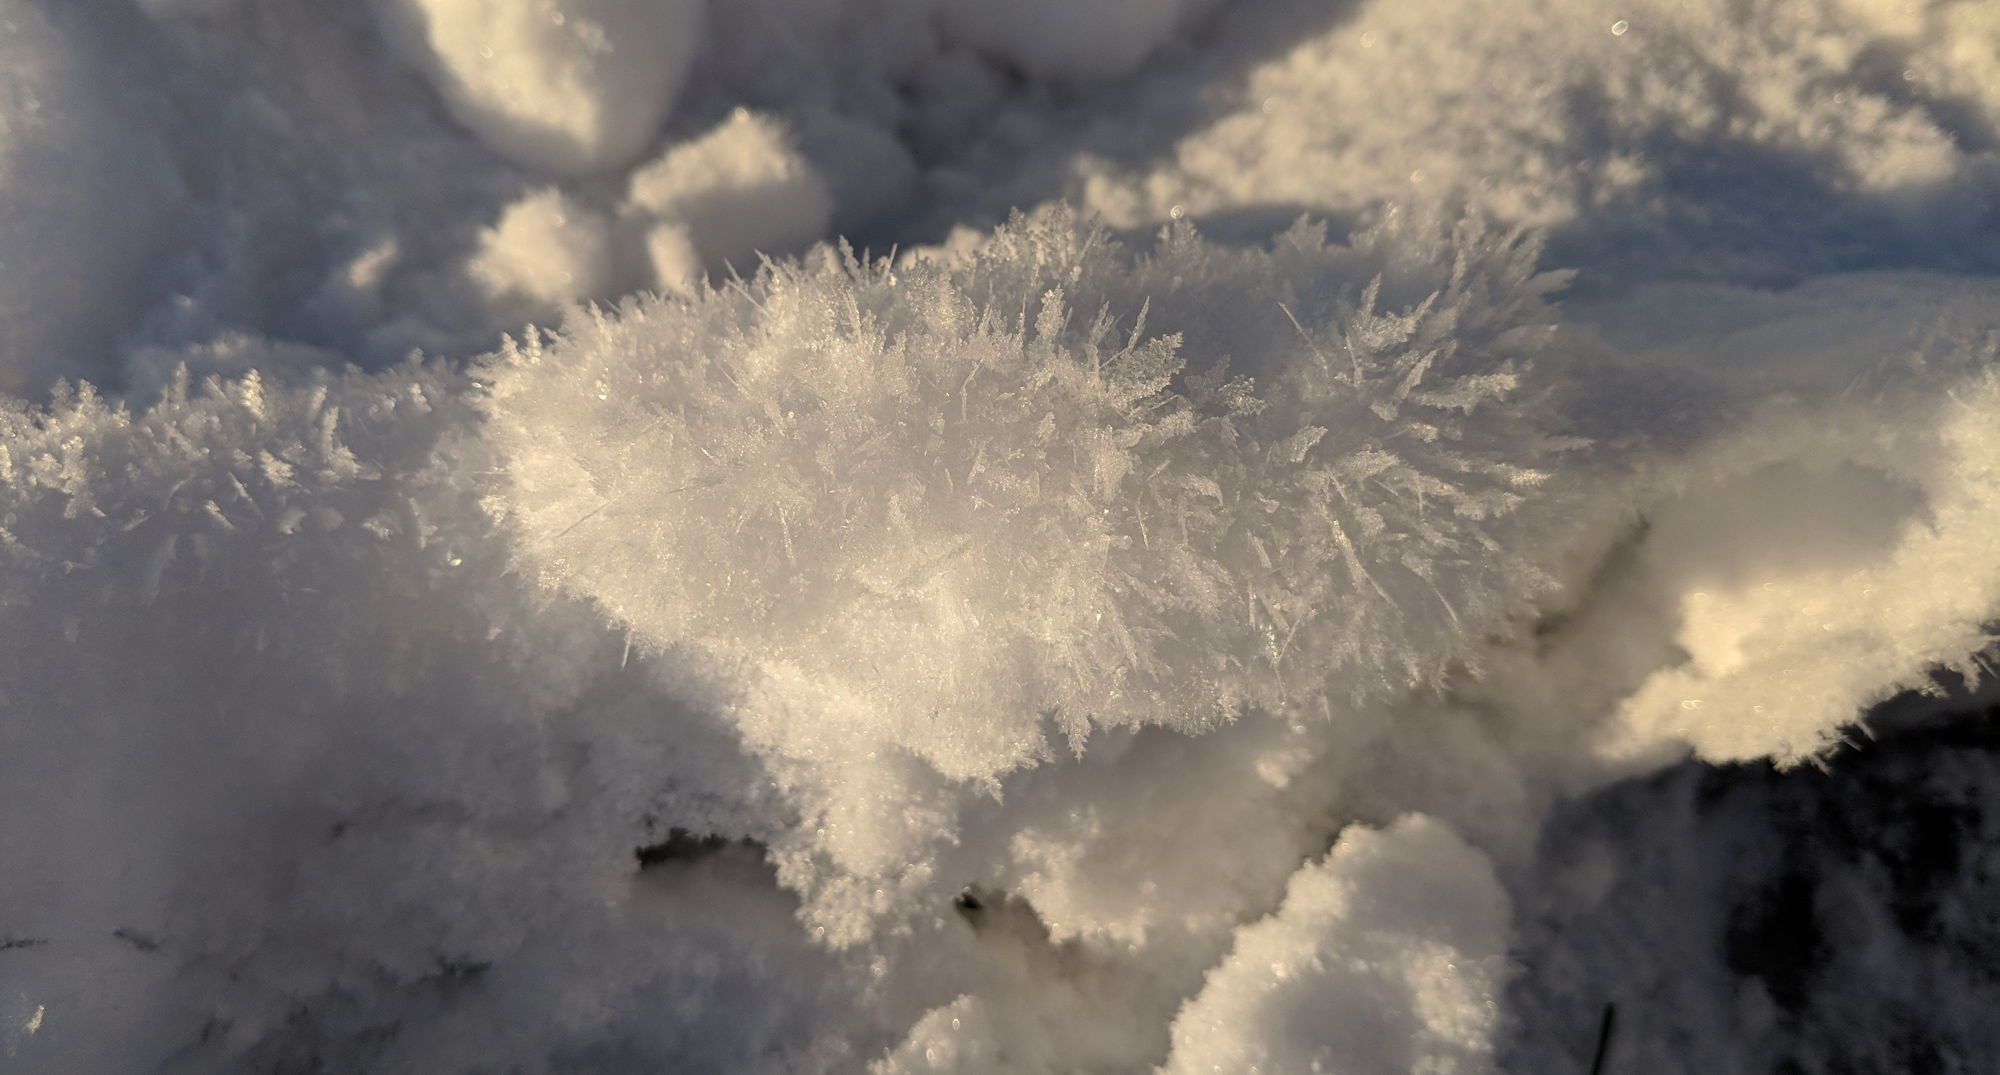 Ice crystals grow during a cold snap. Credit: Phil Plait